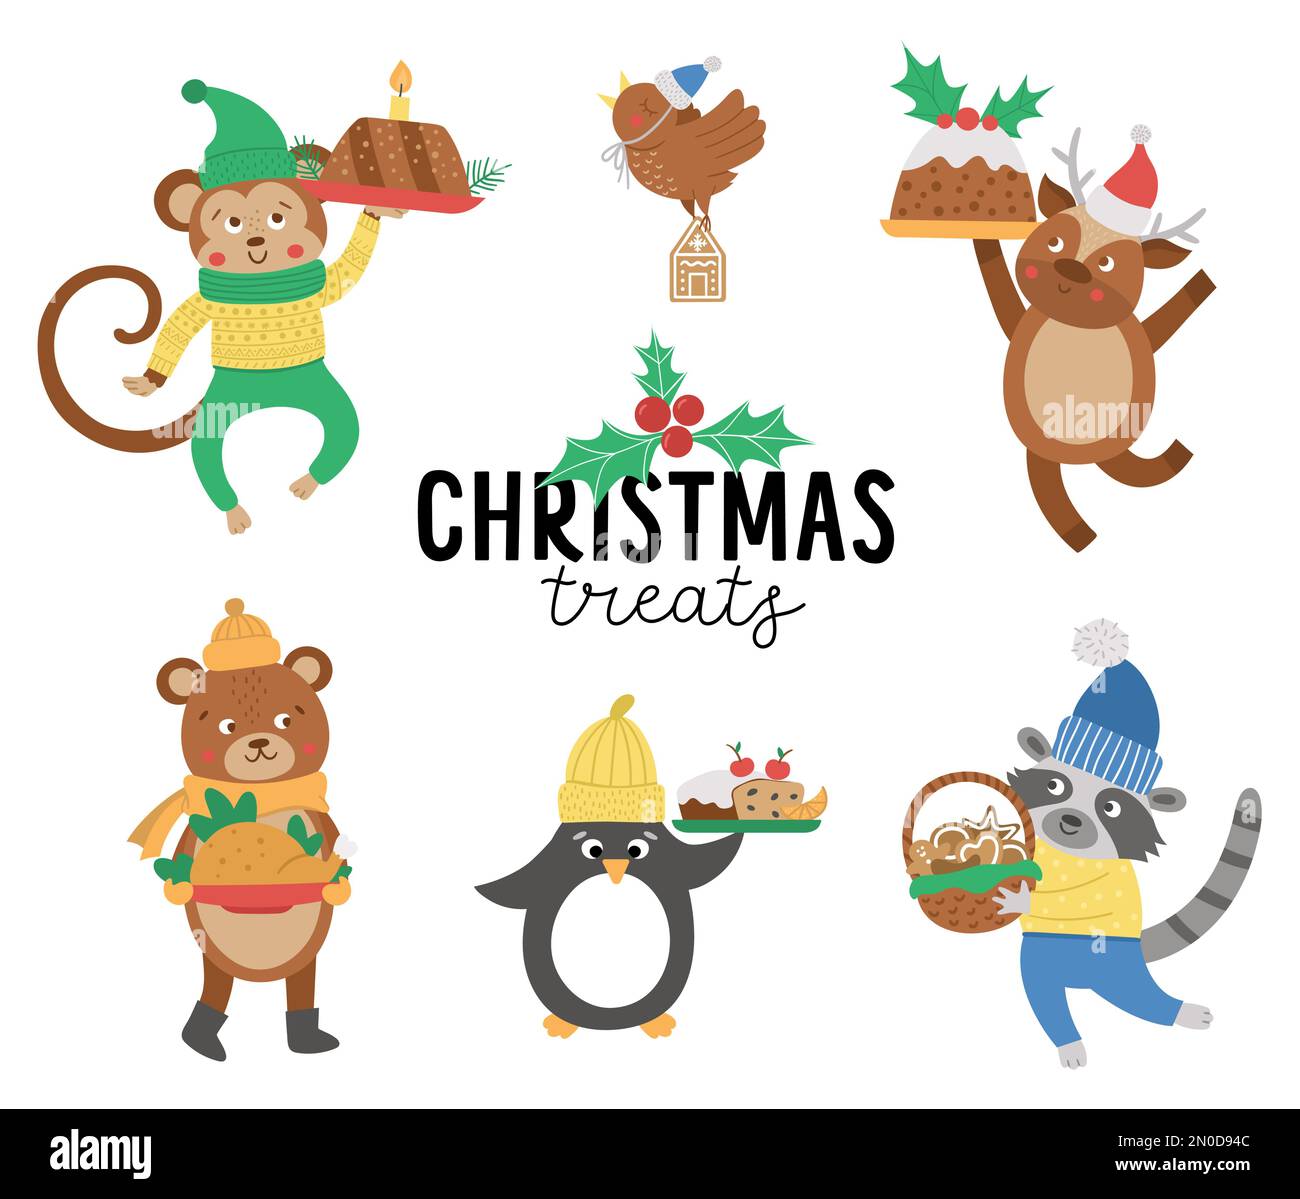 Cute vector animals in hats, scarves and sweaters with traditional Christmas dishes. Winter set of characters with food. Funny Christmas card designs. Stock Vector